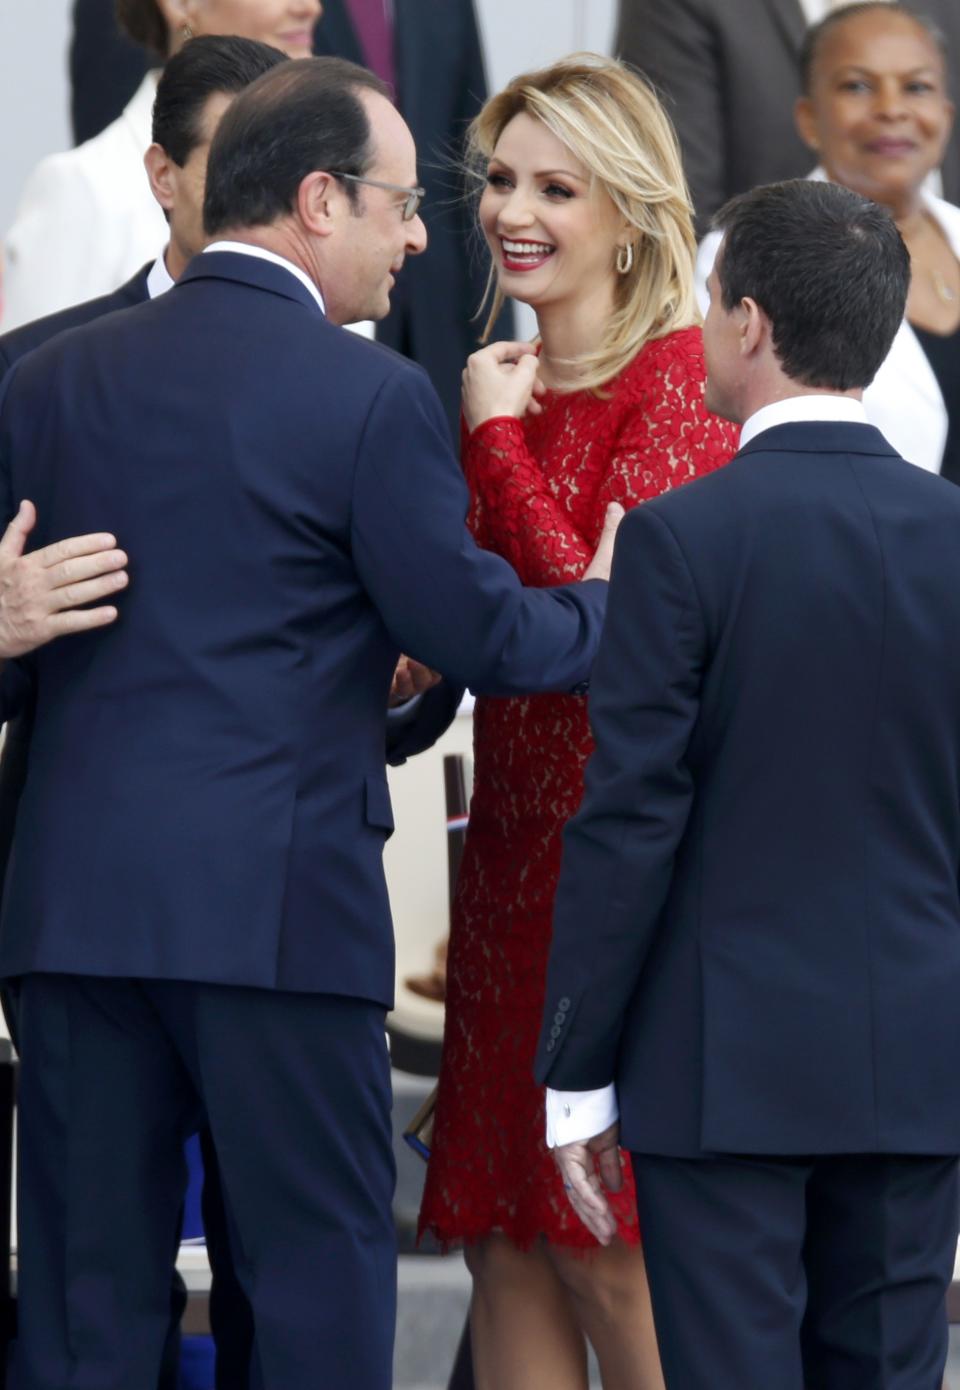 French President Francois Hollande greets Mexico's President Enrique Pena Nieto and Mexico's First Lady Angelica Rivera at the start of the traditional Bastille Day military parade in Paris